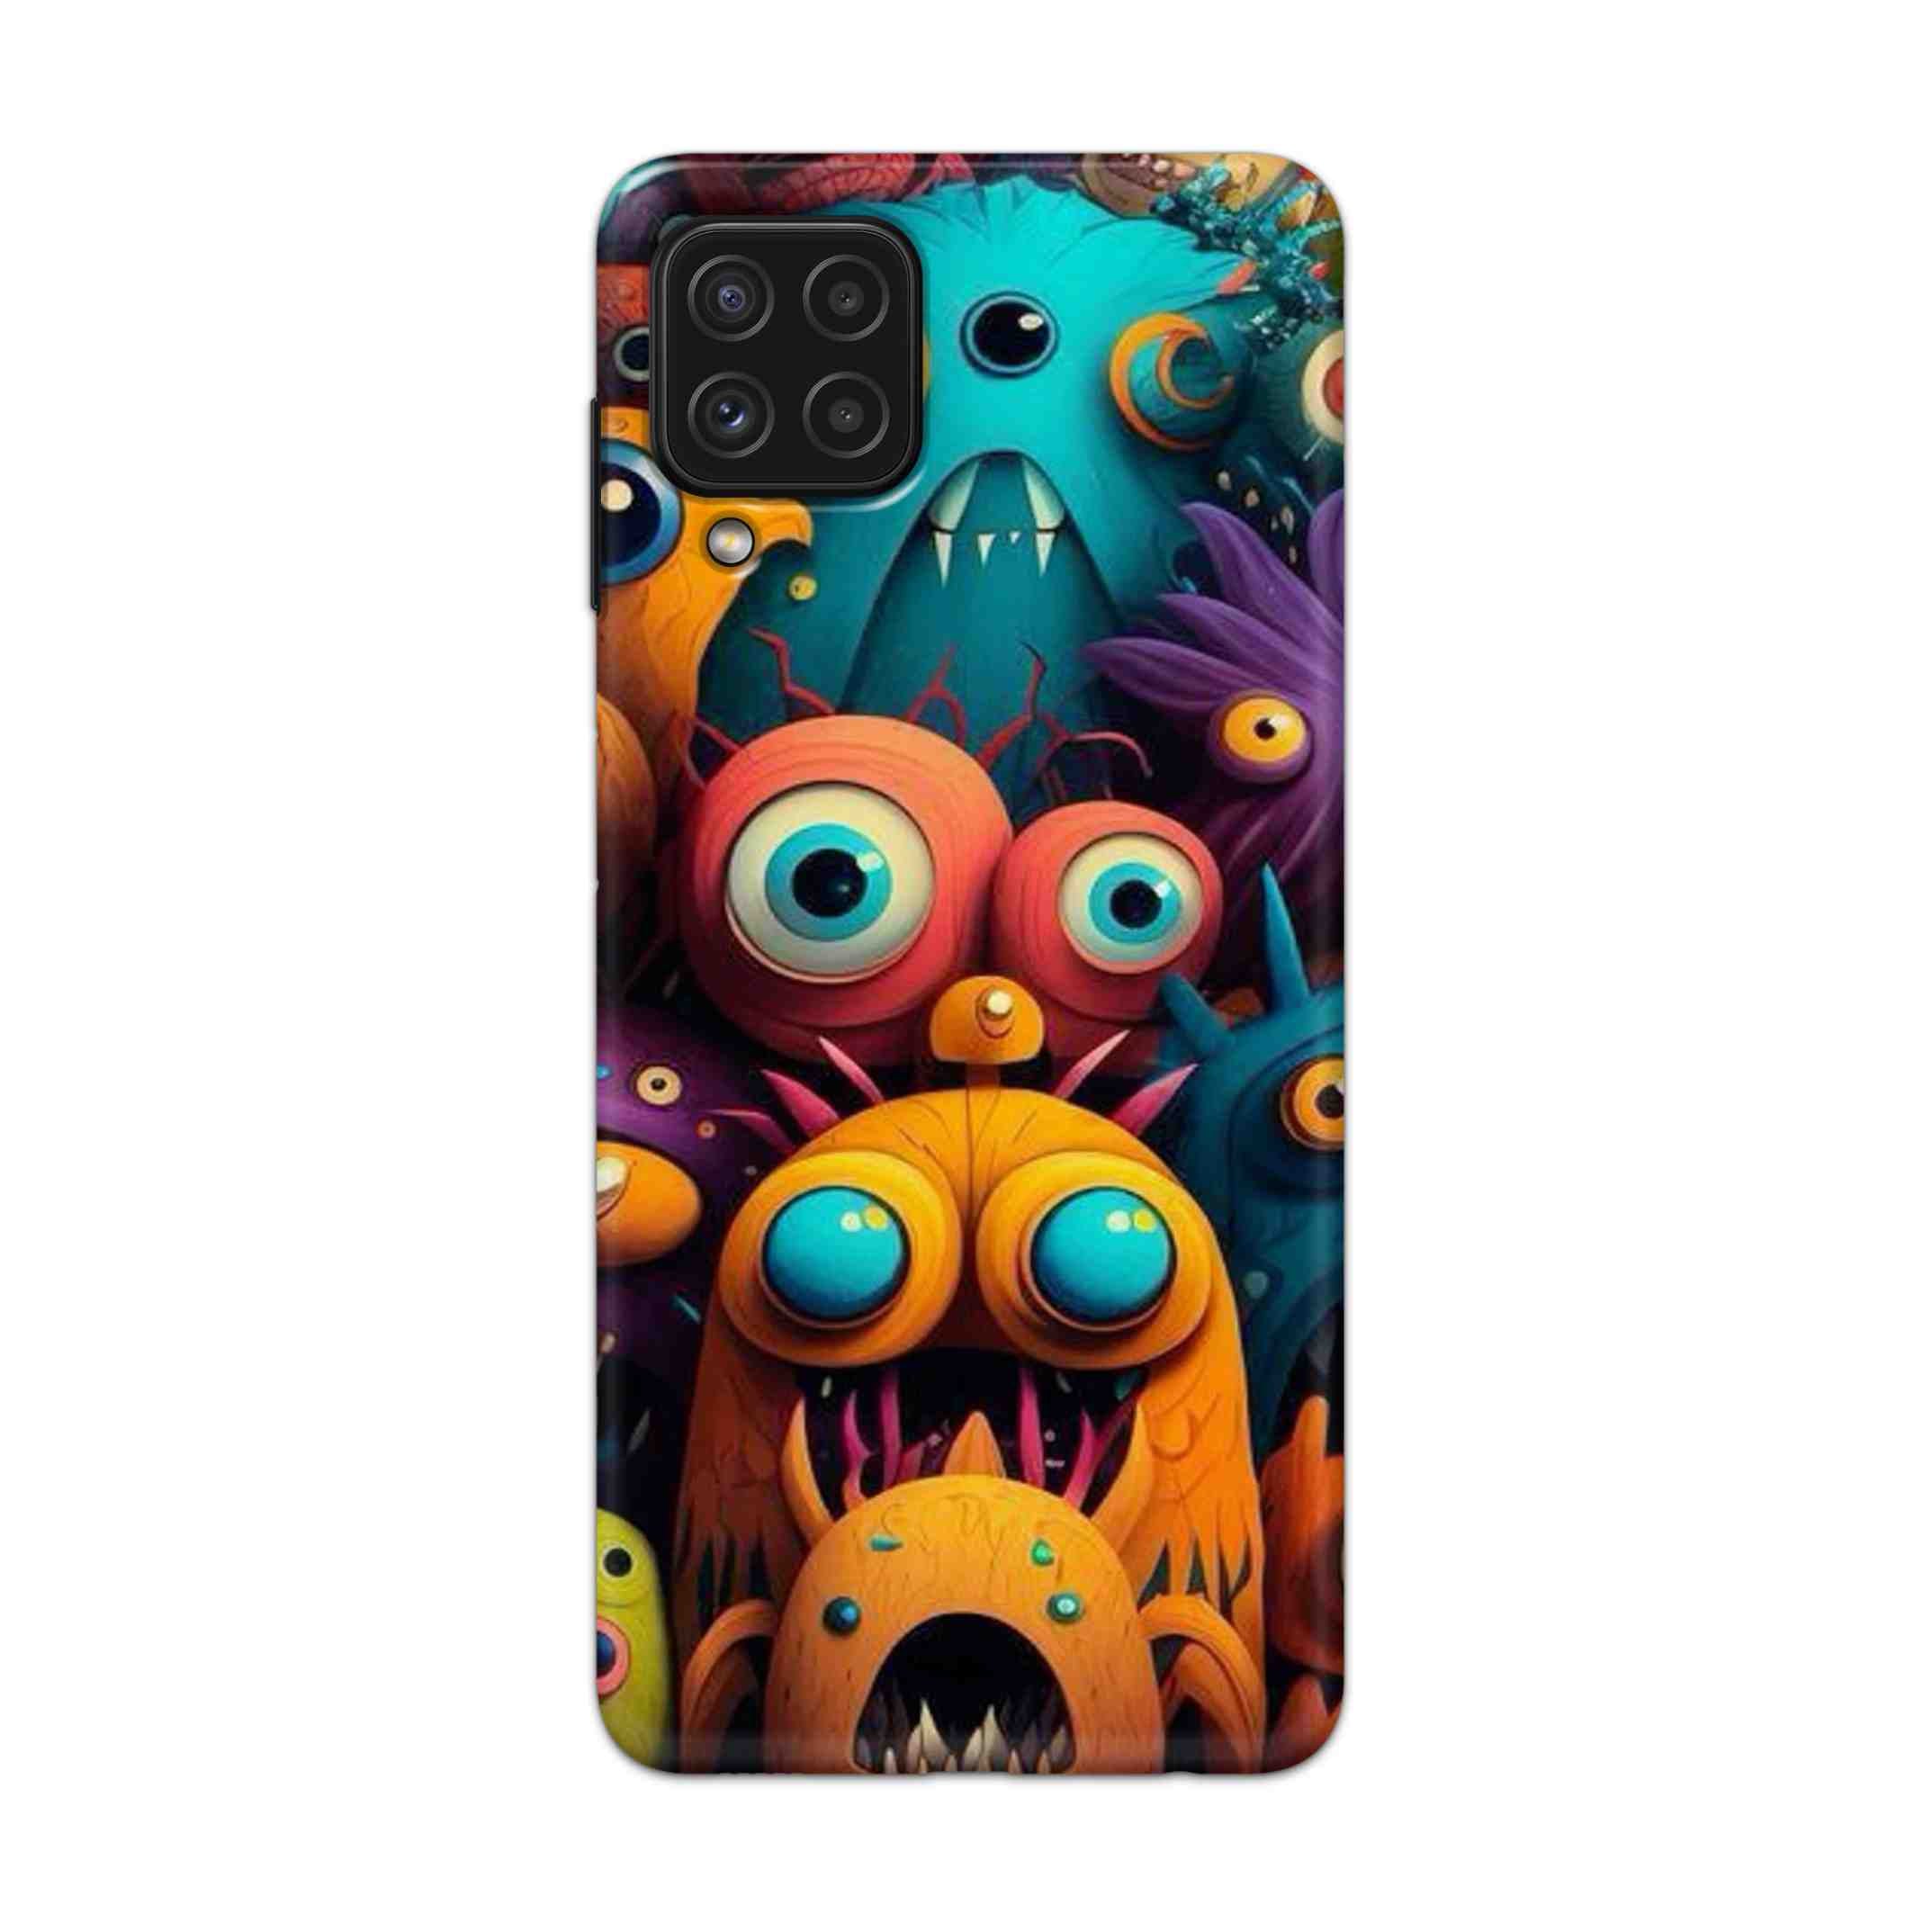 Buy Zombie Hard Back Mobile Phone Case Cover For Samsung Galaxy A22 Online